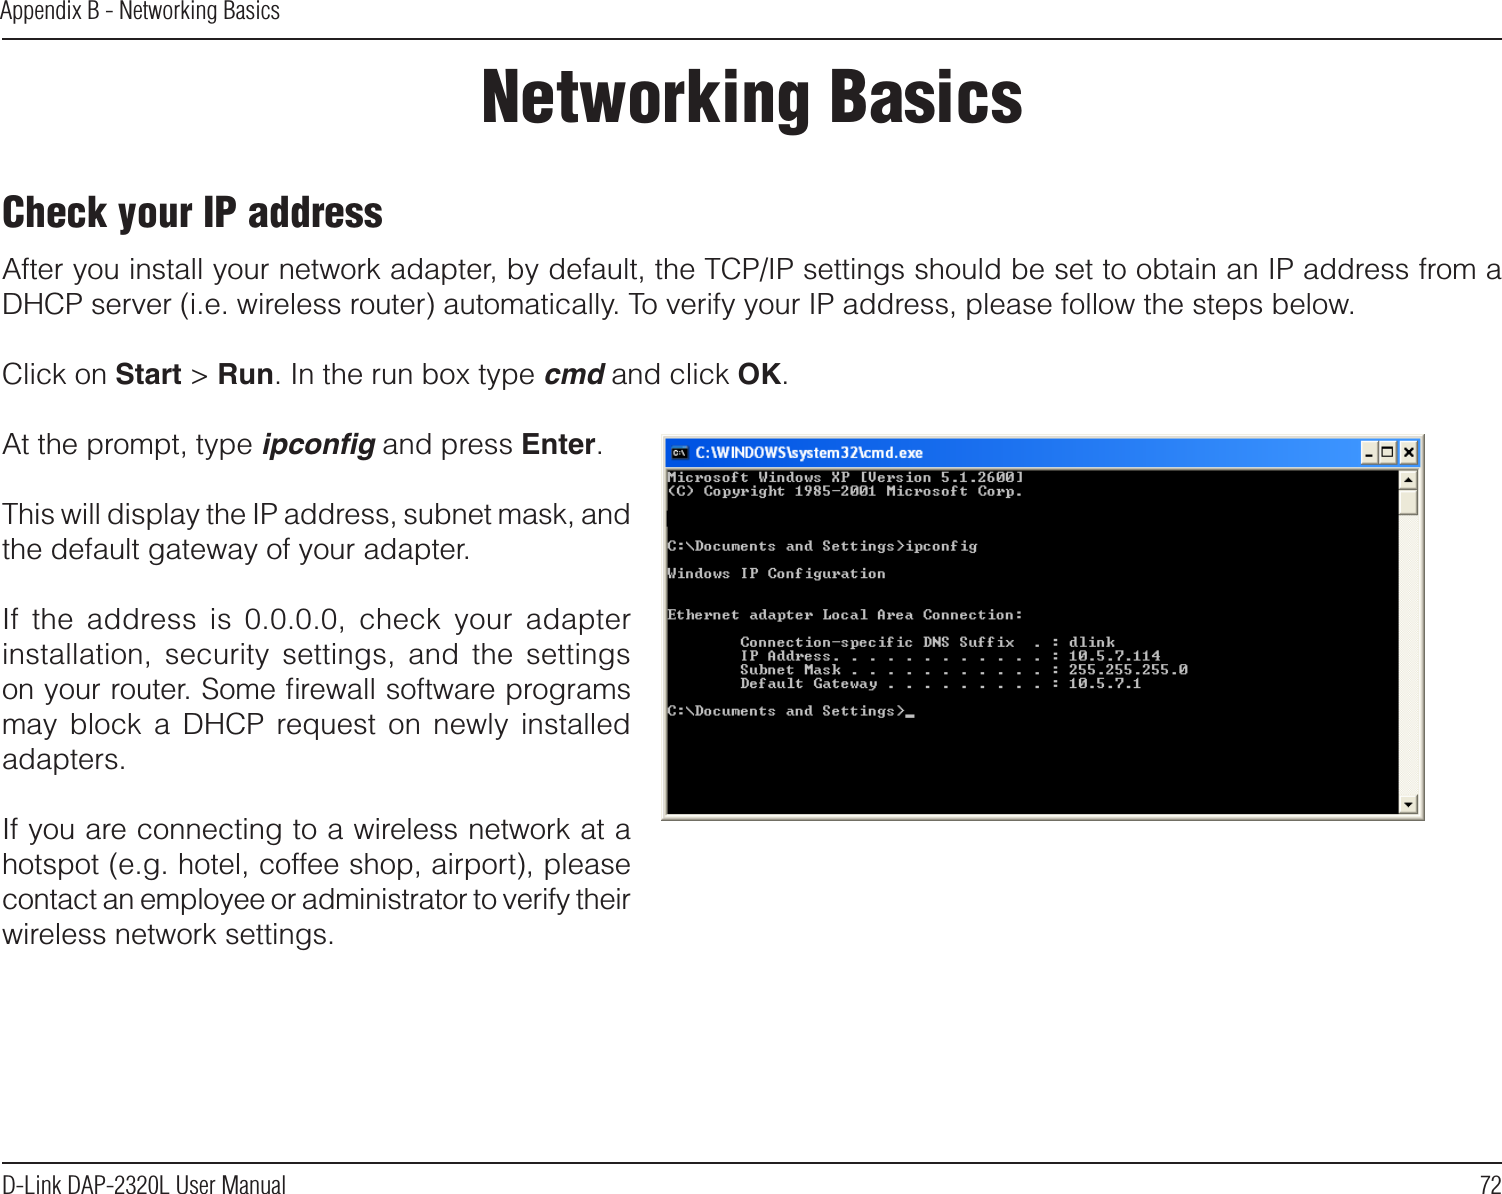 72D-Link DAP-2320L User ManualAppendix B - Networking BasicsNetworking BasicsCheck your IP addressAfter you install your network adapter, by default, the TCP/IP settings should be set to obtain an IP address from a DHCP server (i.e. wireless router) automatically. To verify your IP address, please follow the steps below.Click on Start &gt; Run. In the run box type cmd and click OK.At the prompt, type ipconﬁg and press Enter.This will display the IP address, subnet mask, and the default gateway of your adapter.If  the  address  is  0.0.0.0,  check  your  adapter installation,  security  settings,  and  the  settings on your router. Some ﬁrewall software programs may  block  a  DHCP  request  on  newly  installed adapters. If you are connecting to a wireless network at a hotspot (e.g. hotel, coffee shop, airport), please contact an employee or administrator to verify their wireless network settings.